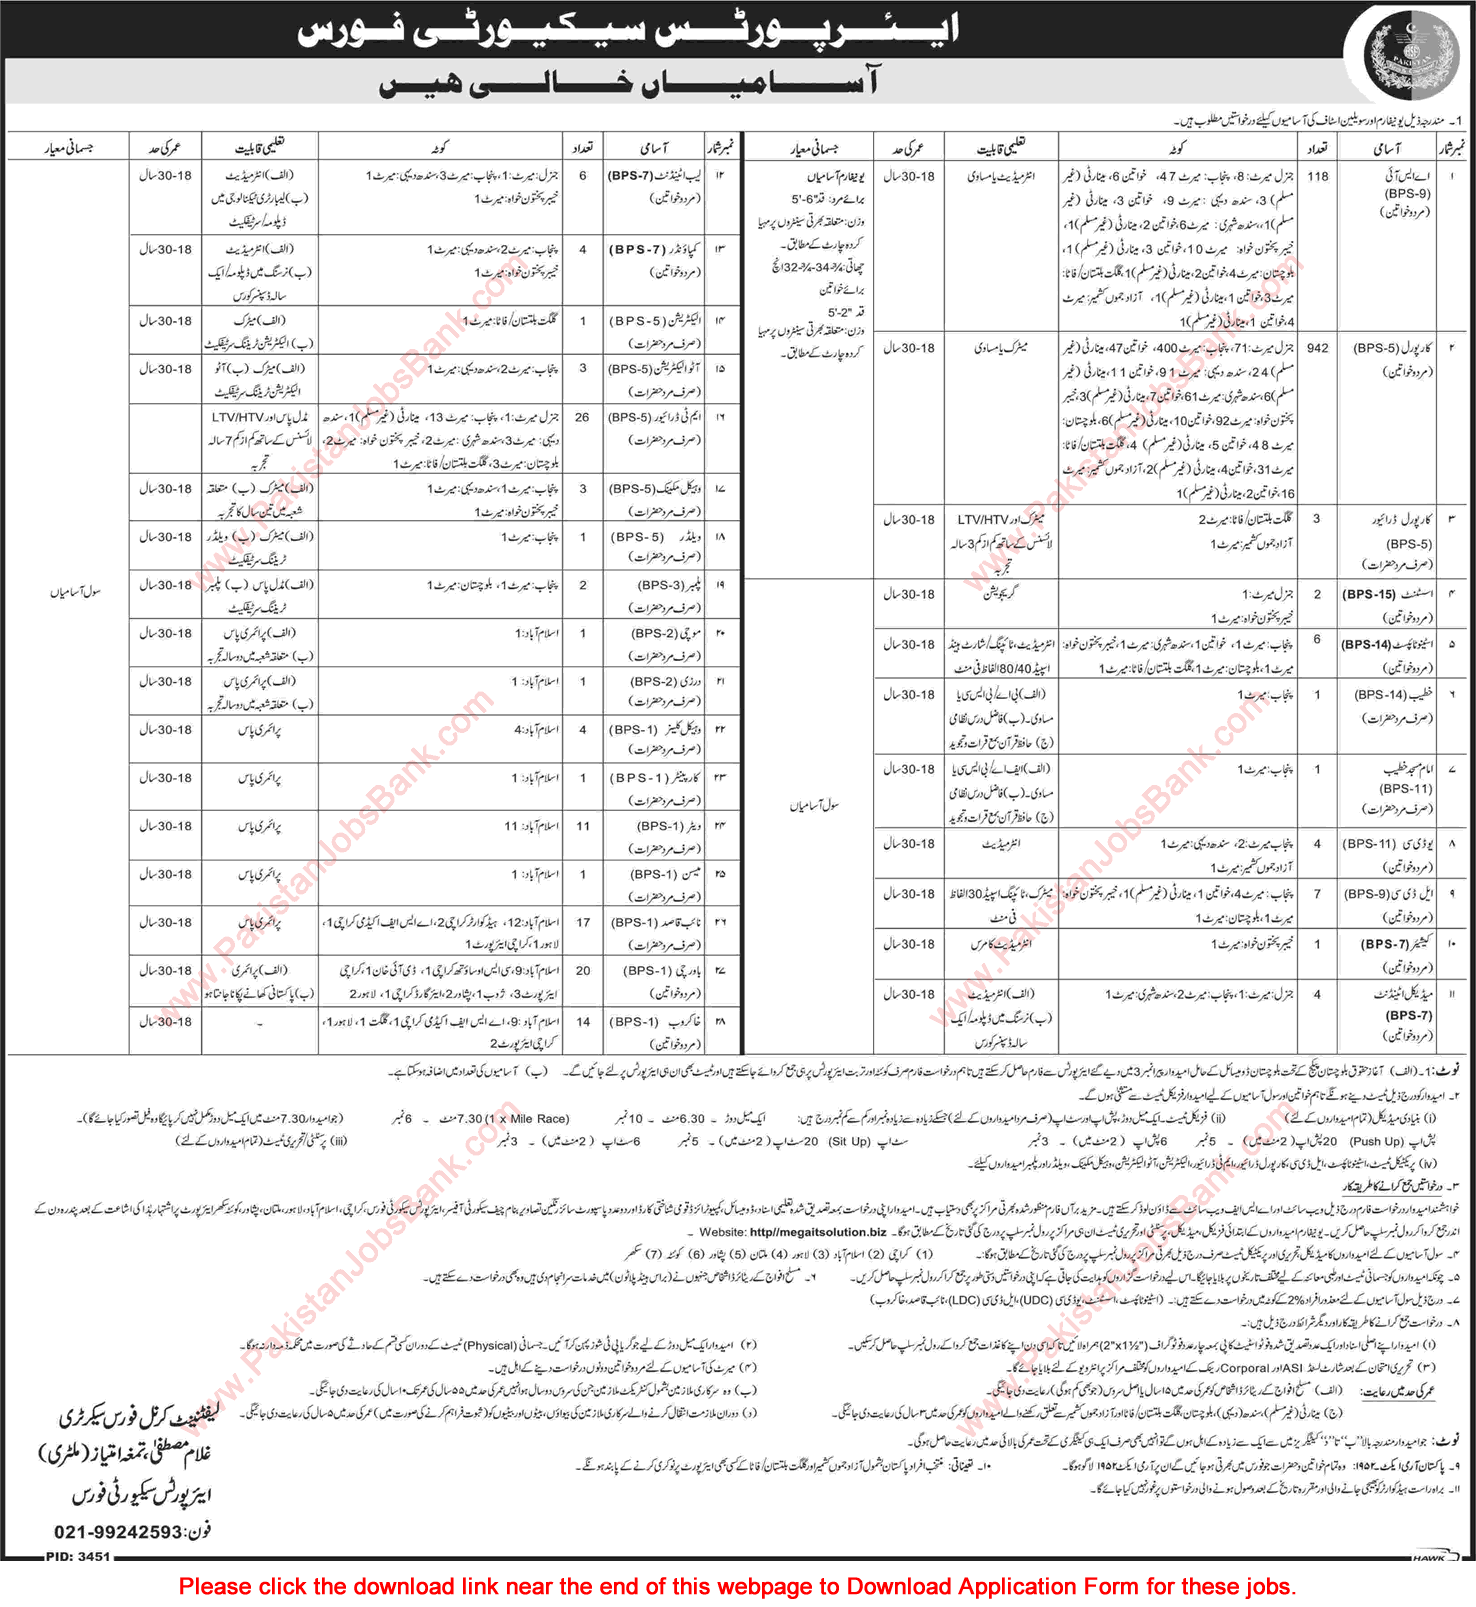 Airport Security Force Jobs 2017 March ASF Application Form Corporals, ASI & Others Latest / New